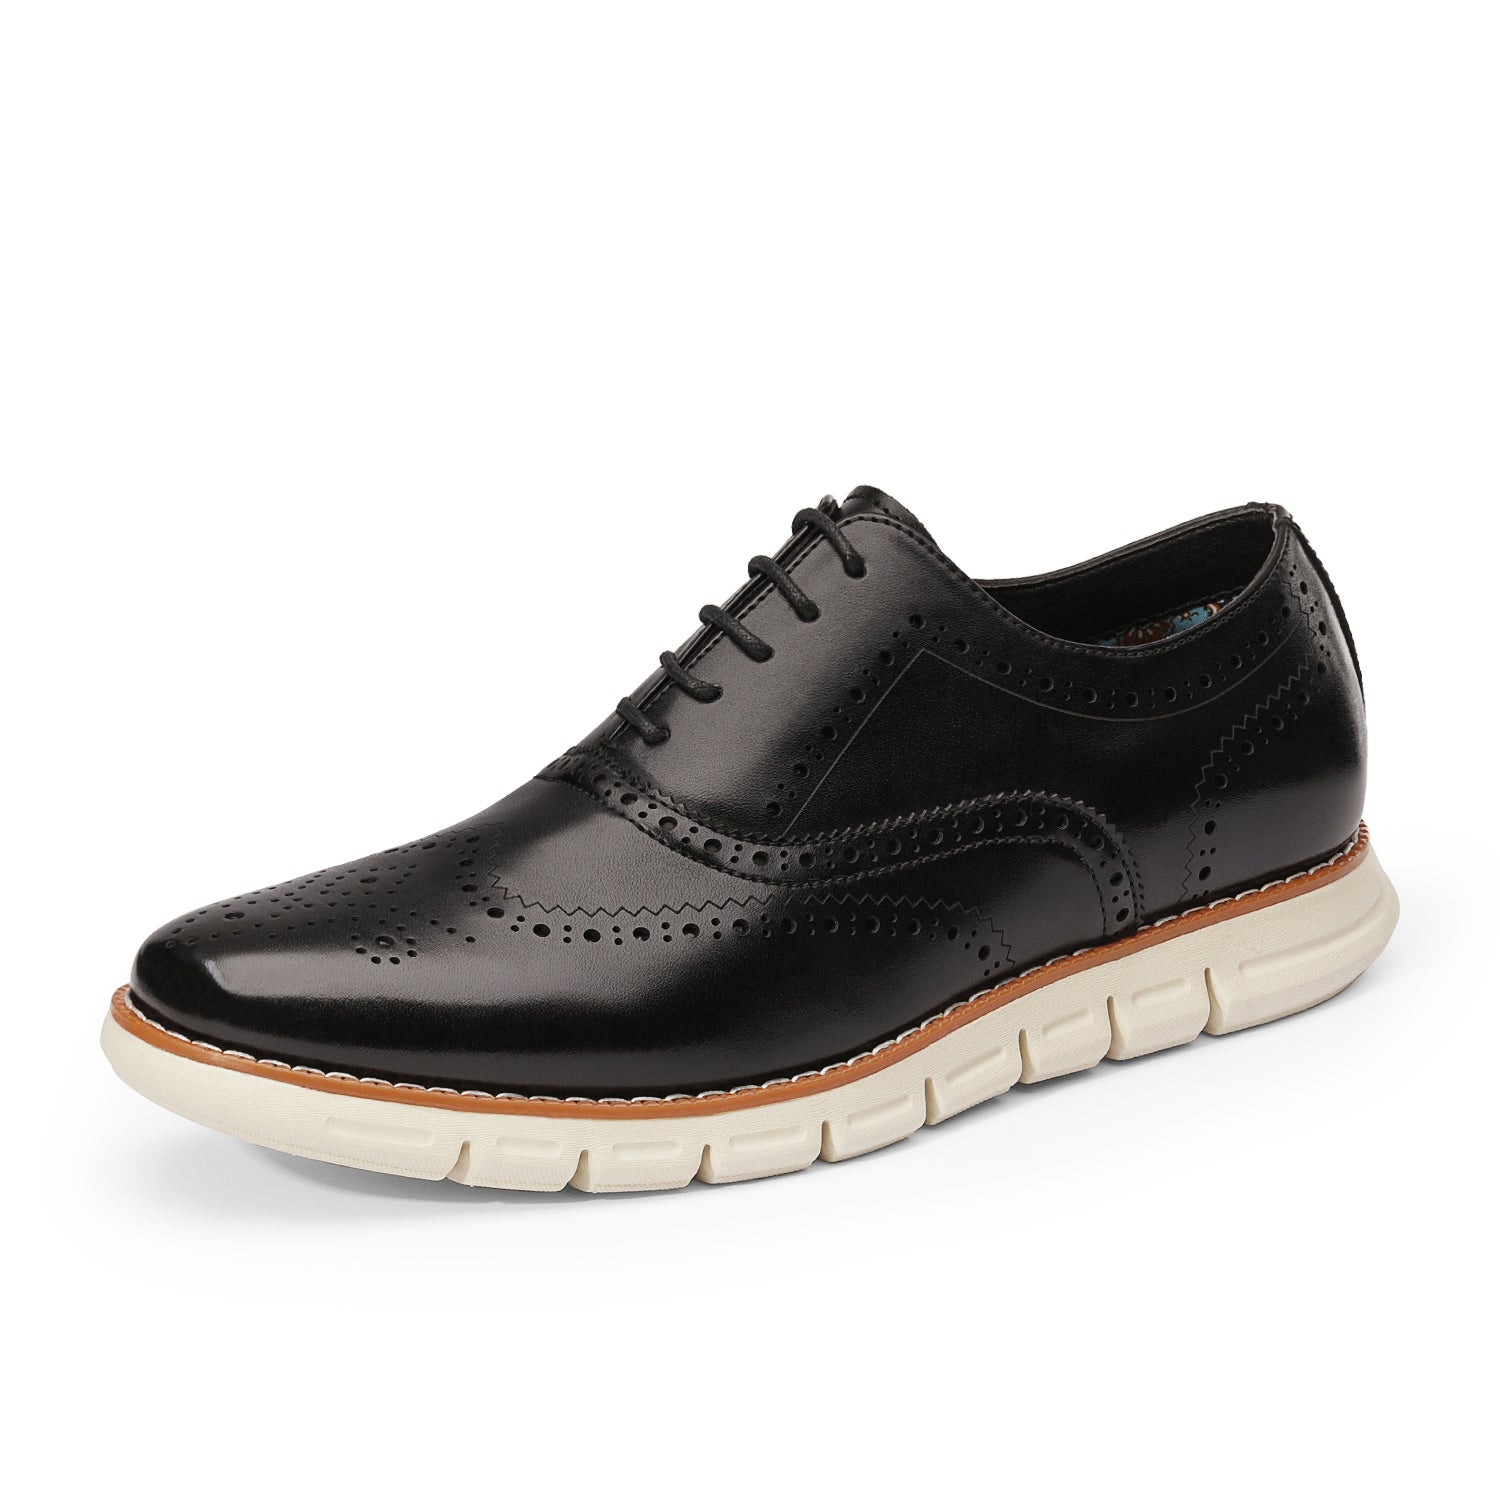 Men's Dress Sneakers Casual Oxford Formal Shoes – Bruno Marc